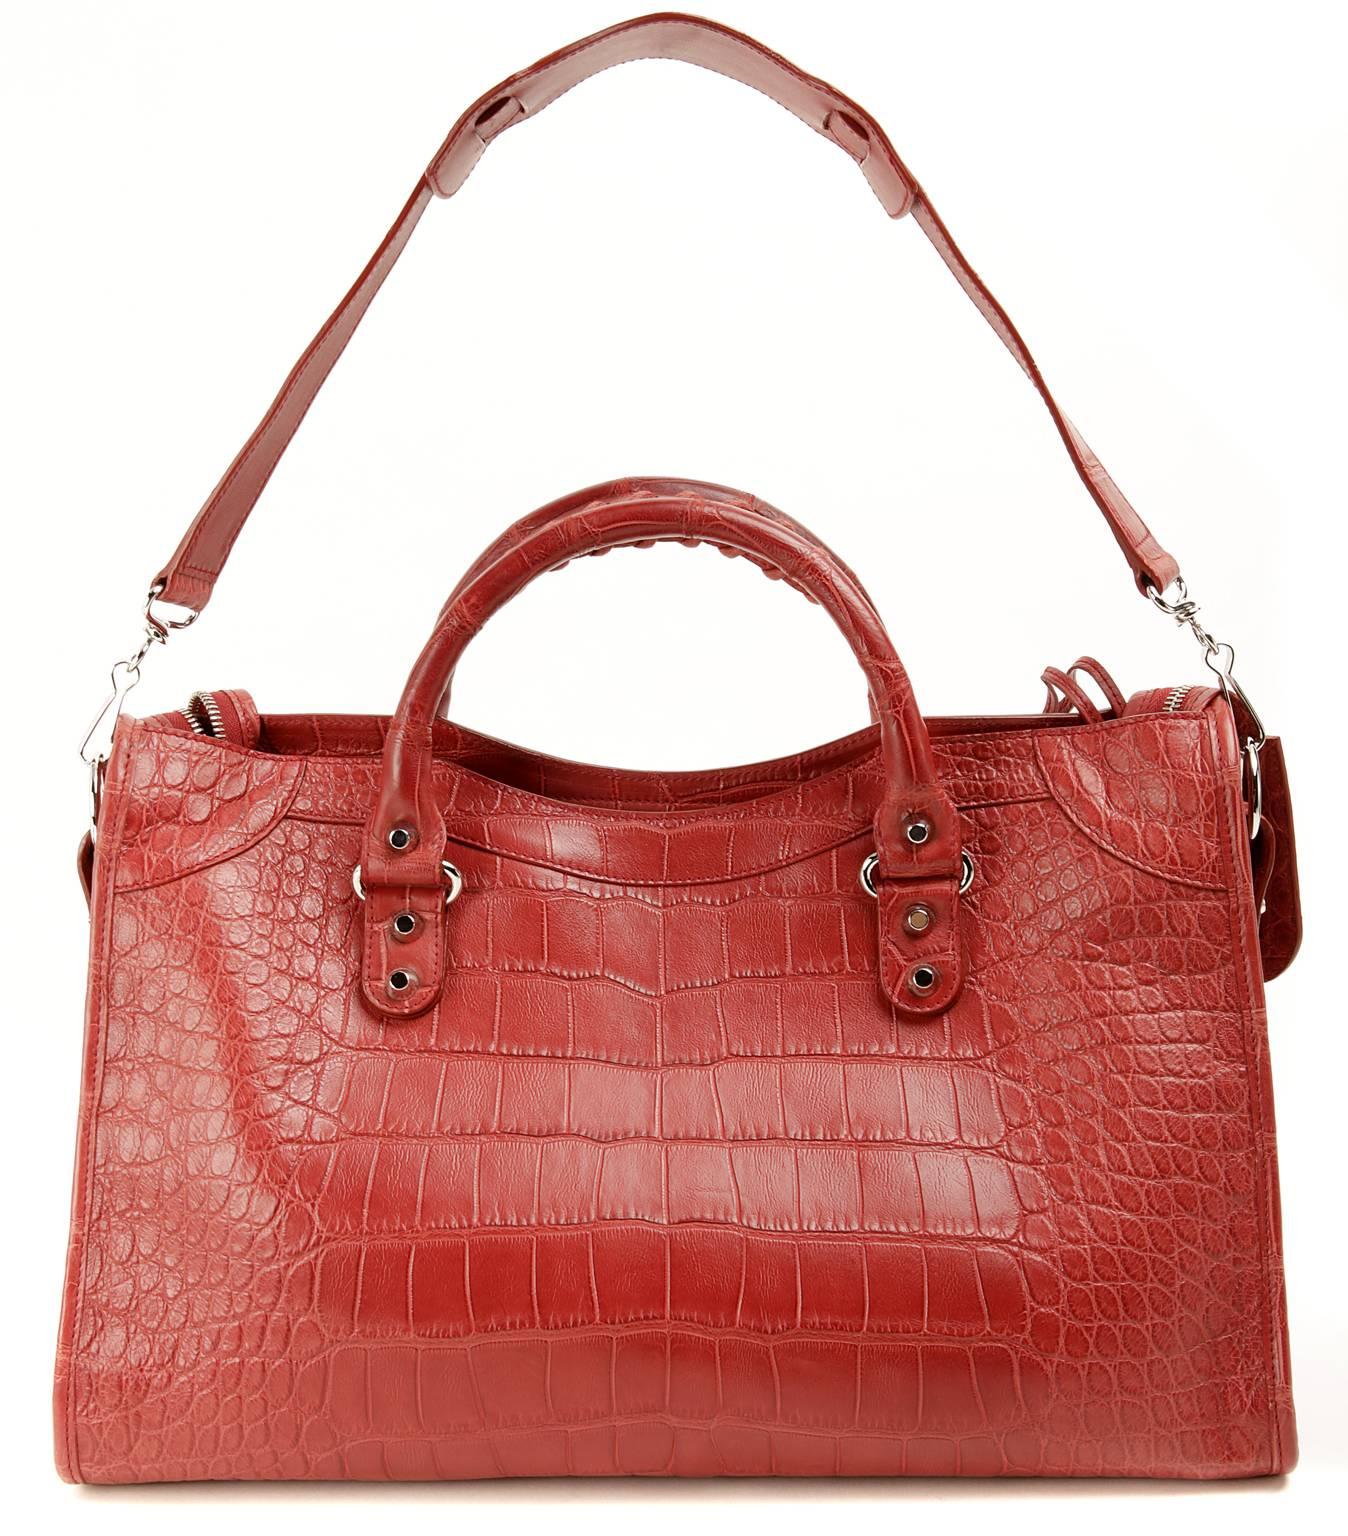 Balenciaga Red Crocodile City Bag- PRISTINE; Appears Never Before Carried
 Rarely seen in crocodile skin, the classic Balenciaga style maintains all the moto inspired details that have made it an iconic favorite. 
 
Matte red crocodile skin